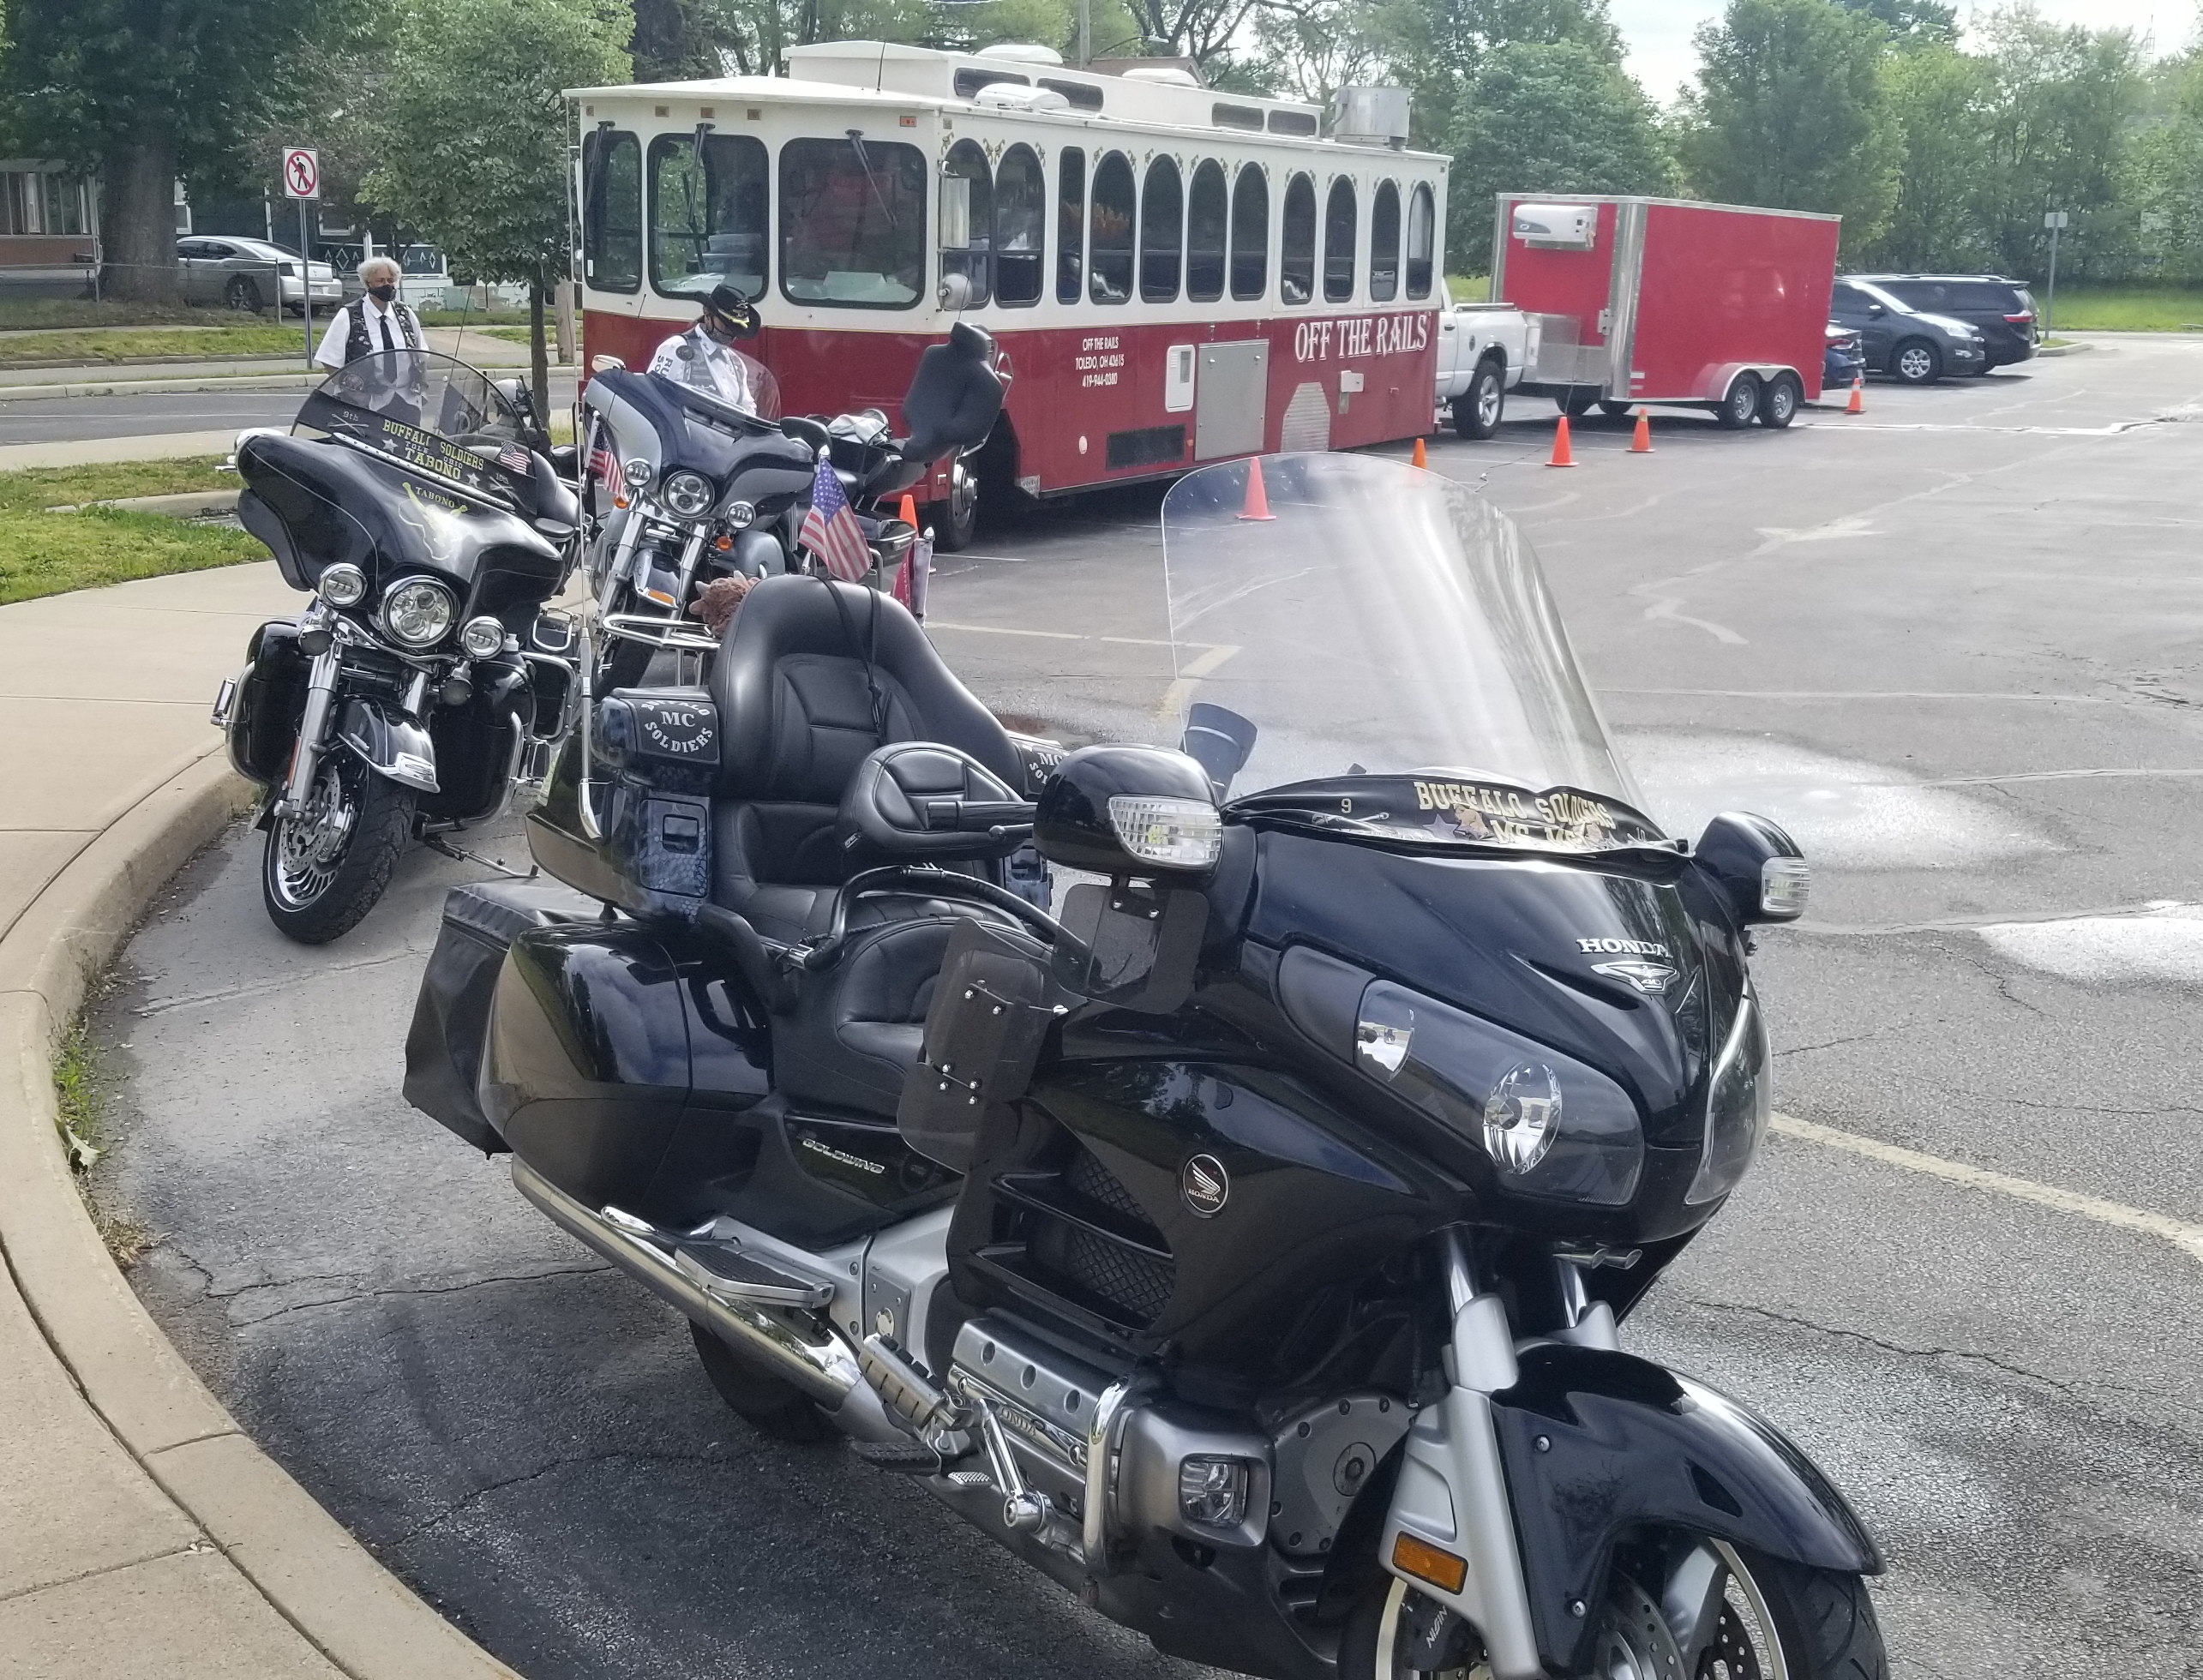 a group of motorcycles parked in a parking lot